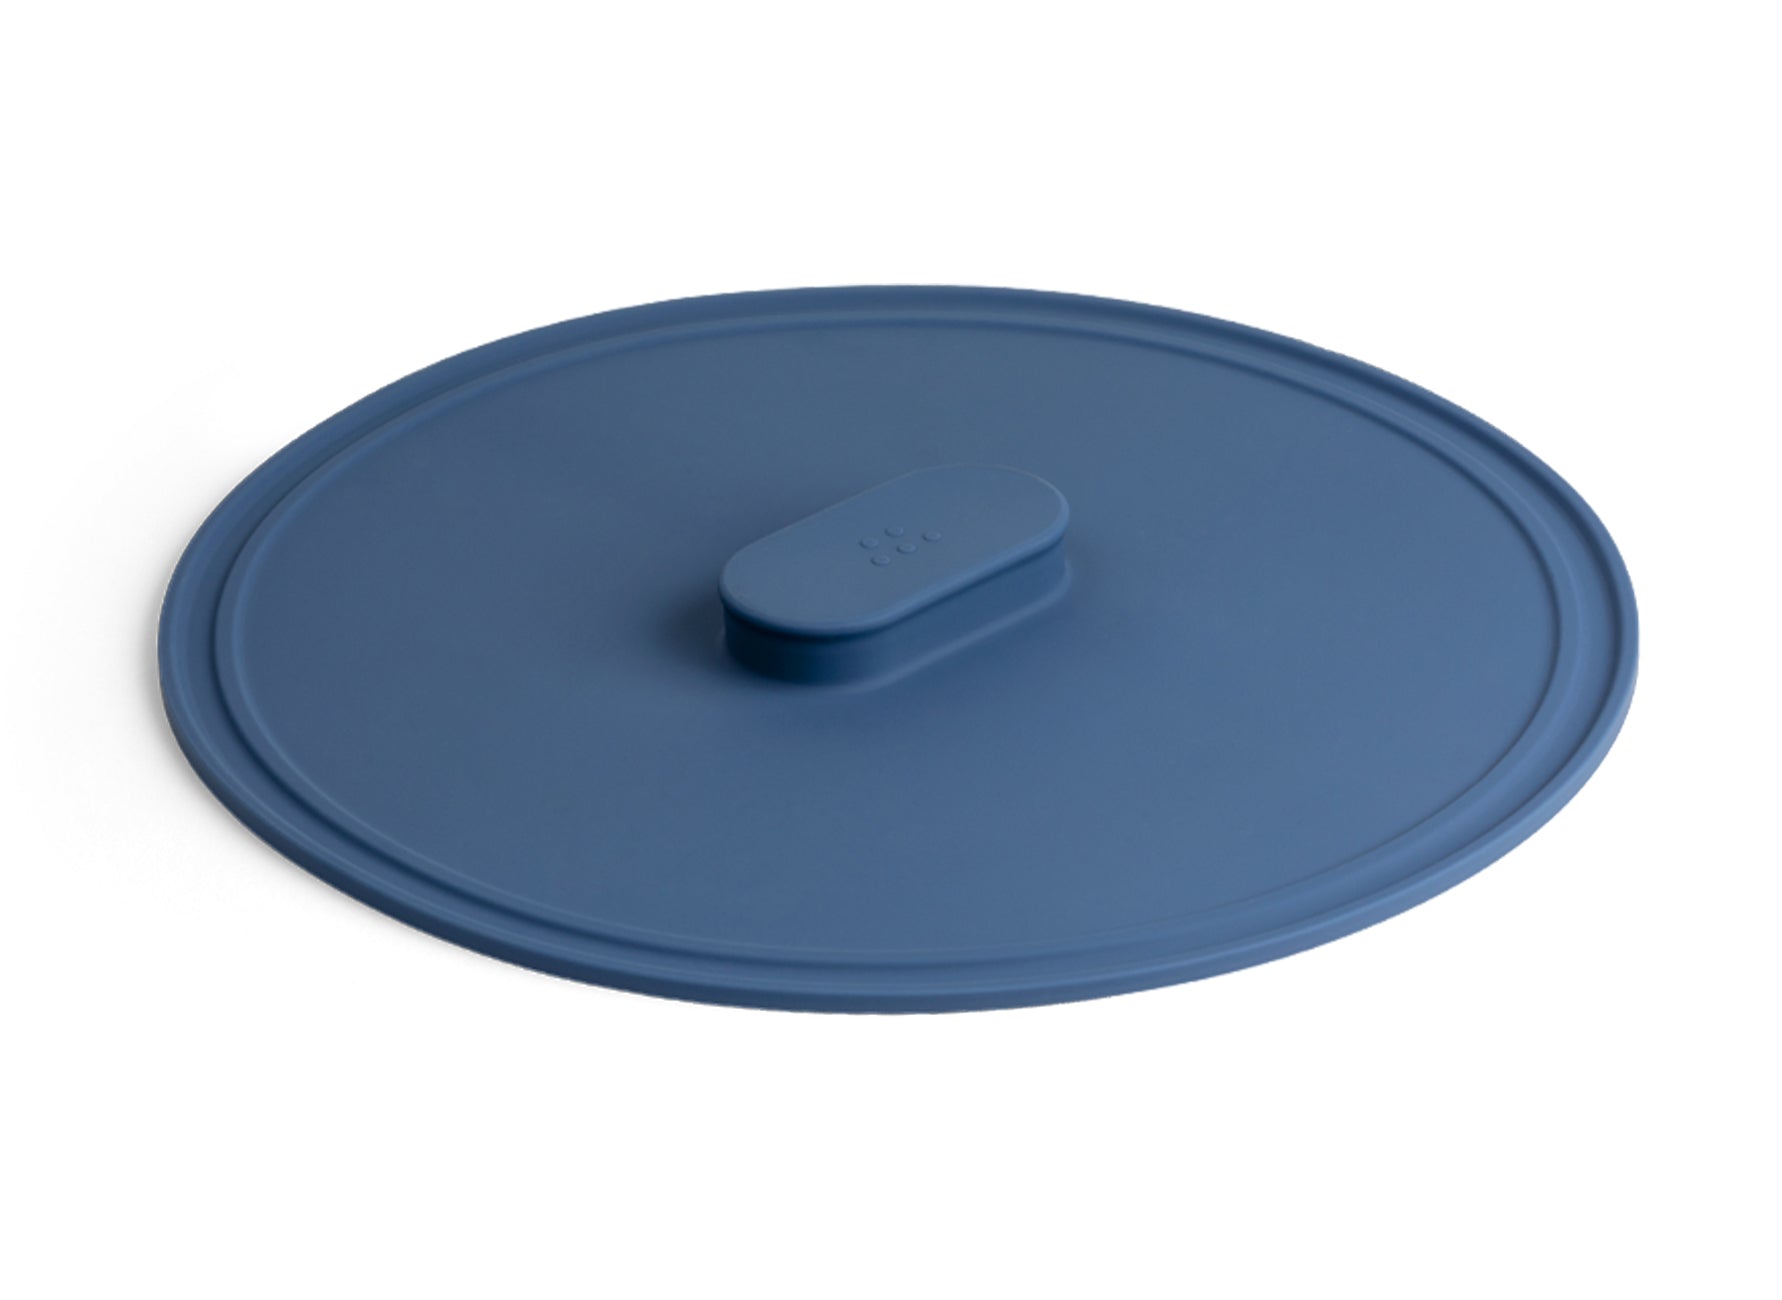 Looking For a Frying Pan With a Lid: A universal lid for all your